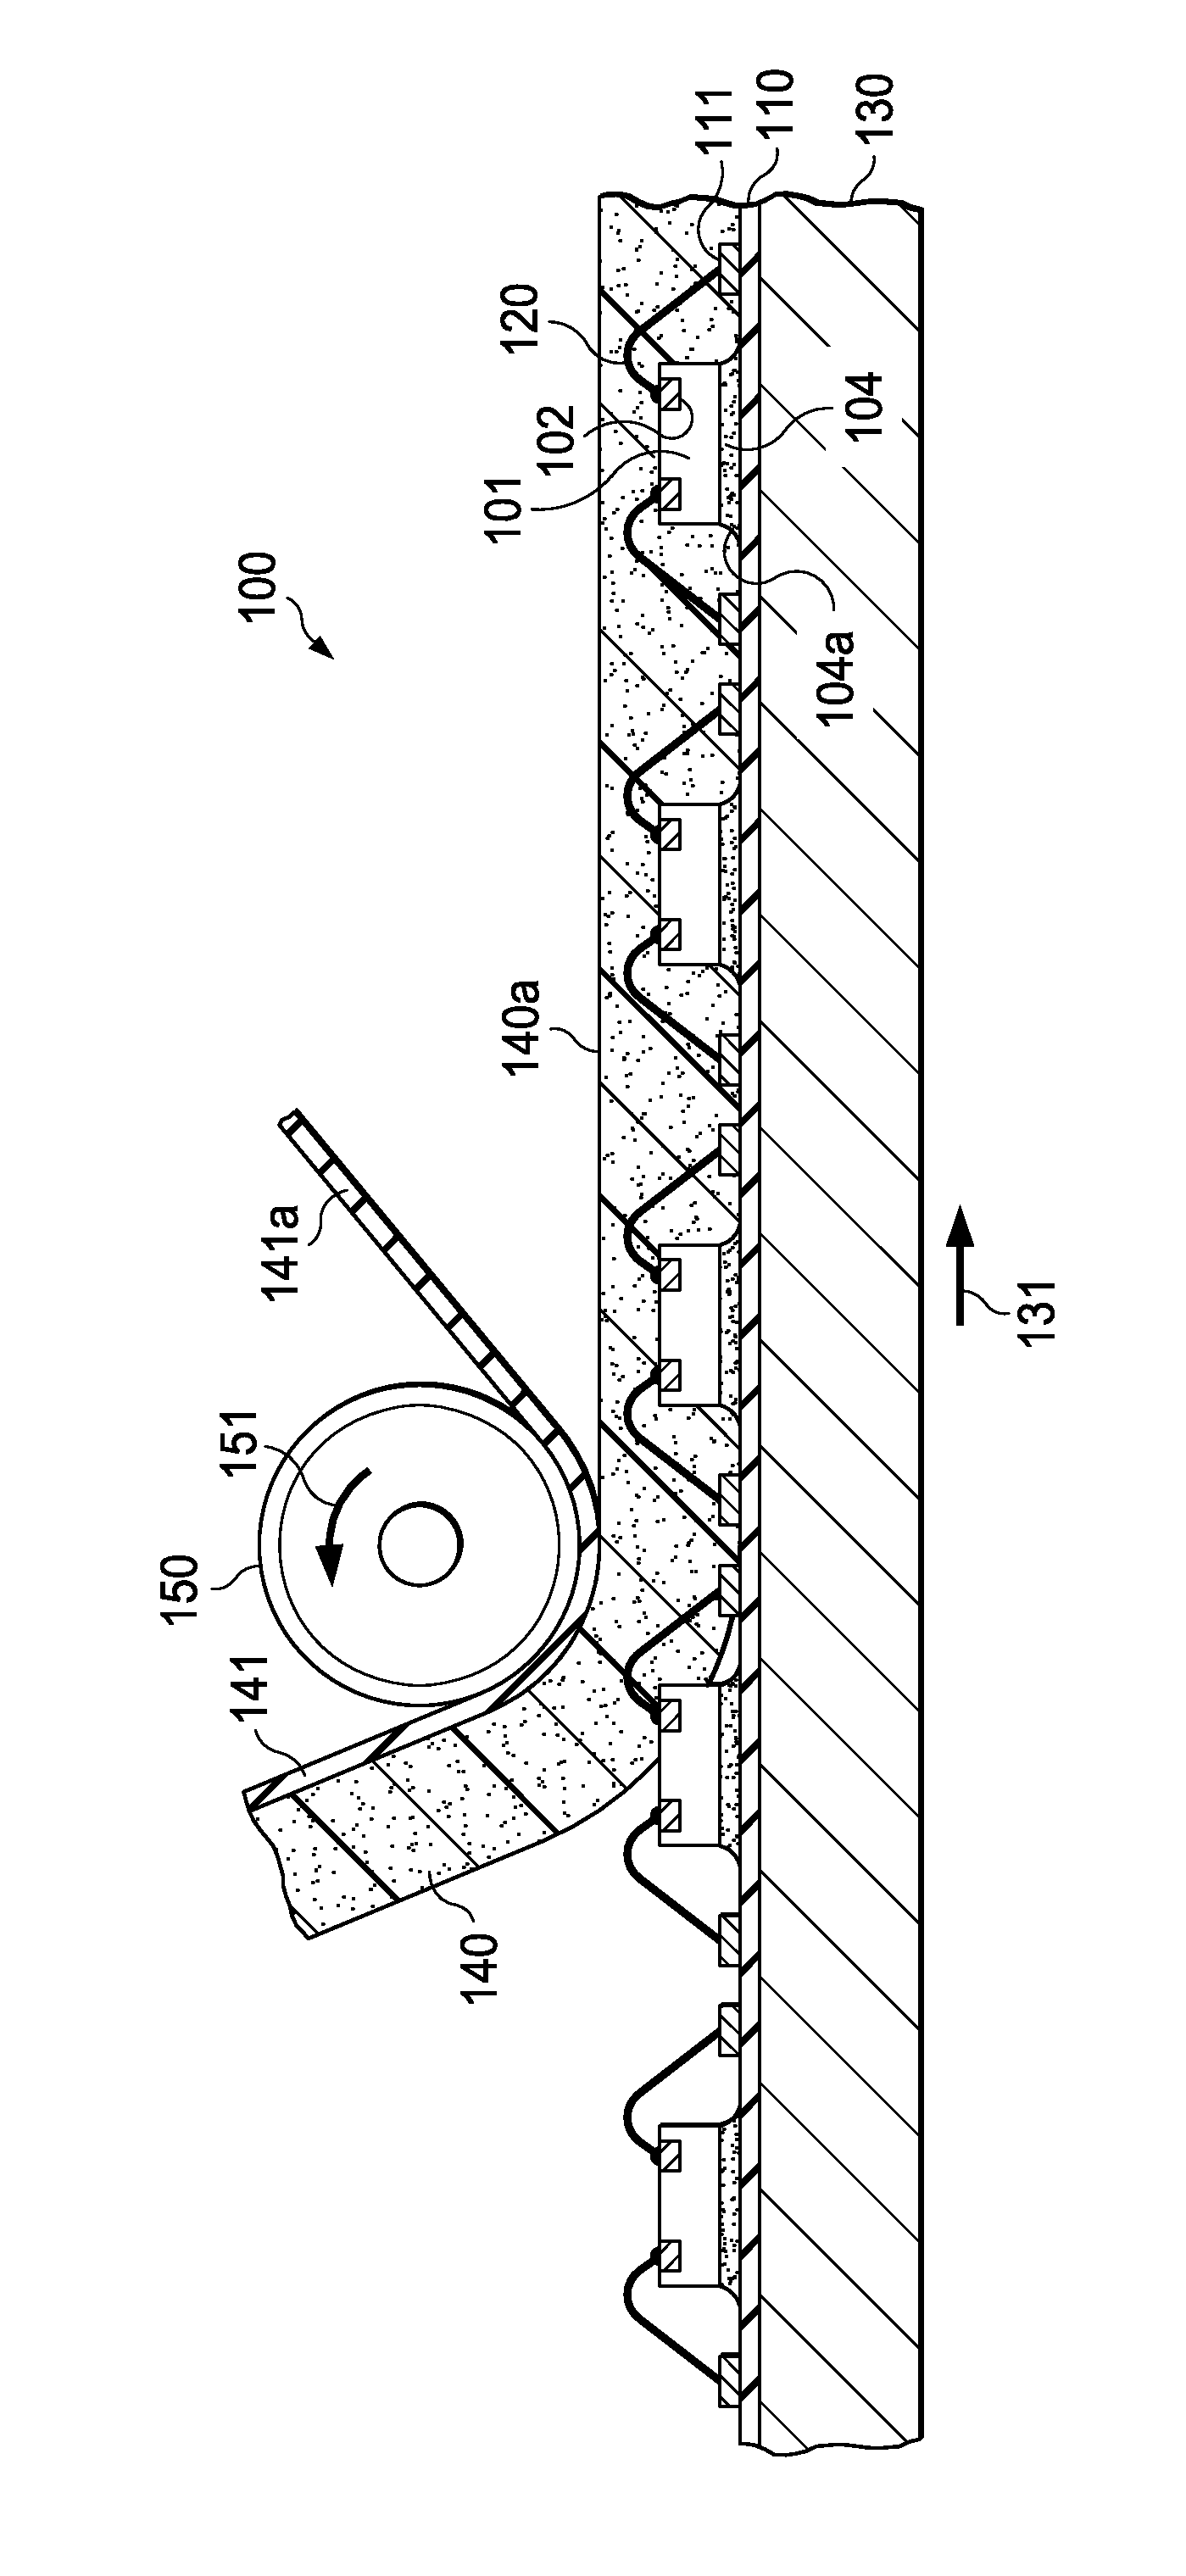 Roll-on encapsulation method for semiconductor packages